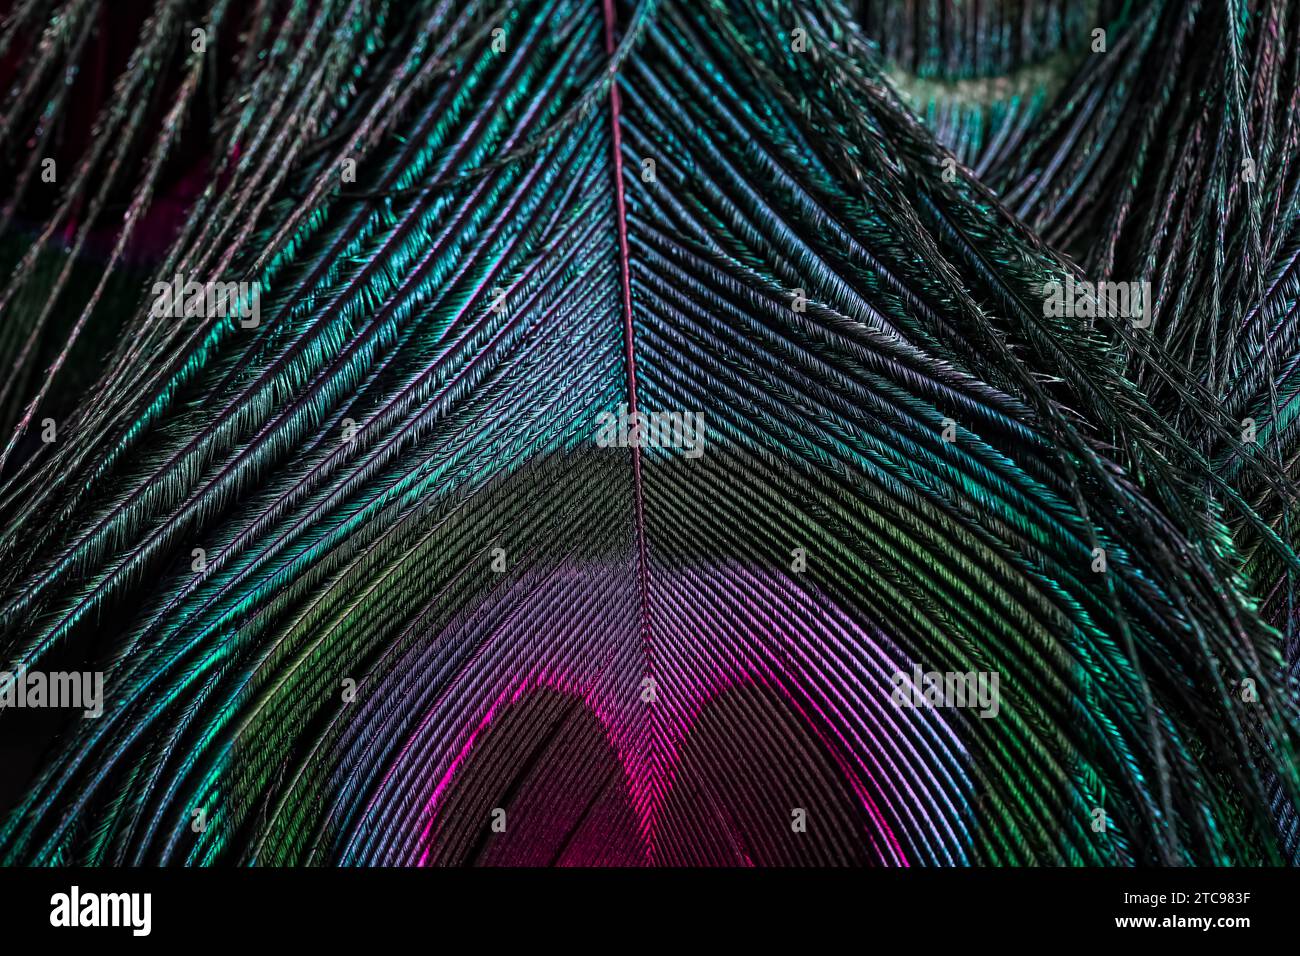 Close up of vibrant colors of a peacock feather, showcasing the intricate details and textures of the feathers Stock Photo